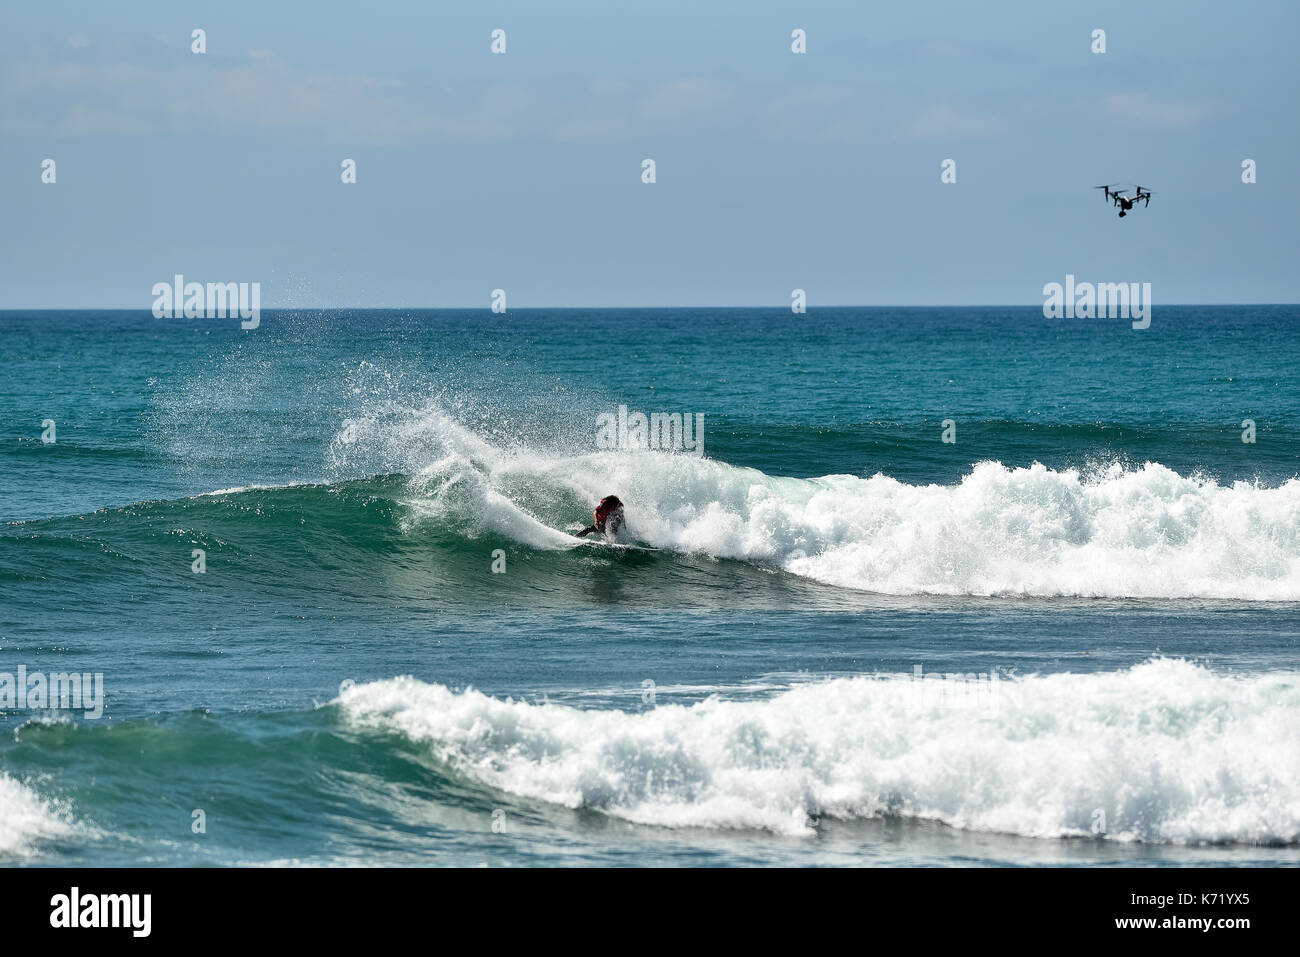 San Clemente, USA. 13 September, 2017.  Surfers compete head to head during the 2017 Hurley Pro surf contest at Lower Trestles, San Onofre State Park, CA. Surfer: Conner Coffin (USA). Credit: Benjamin Ginsberg/Alamy Live News. Stock Photo